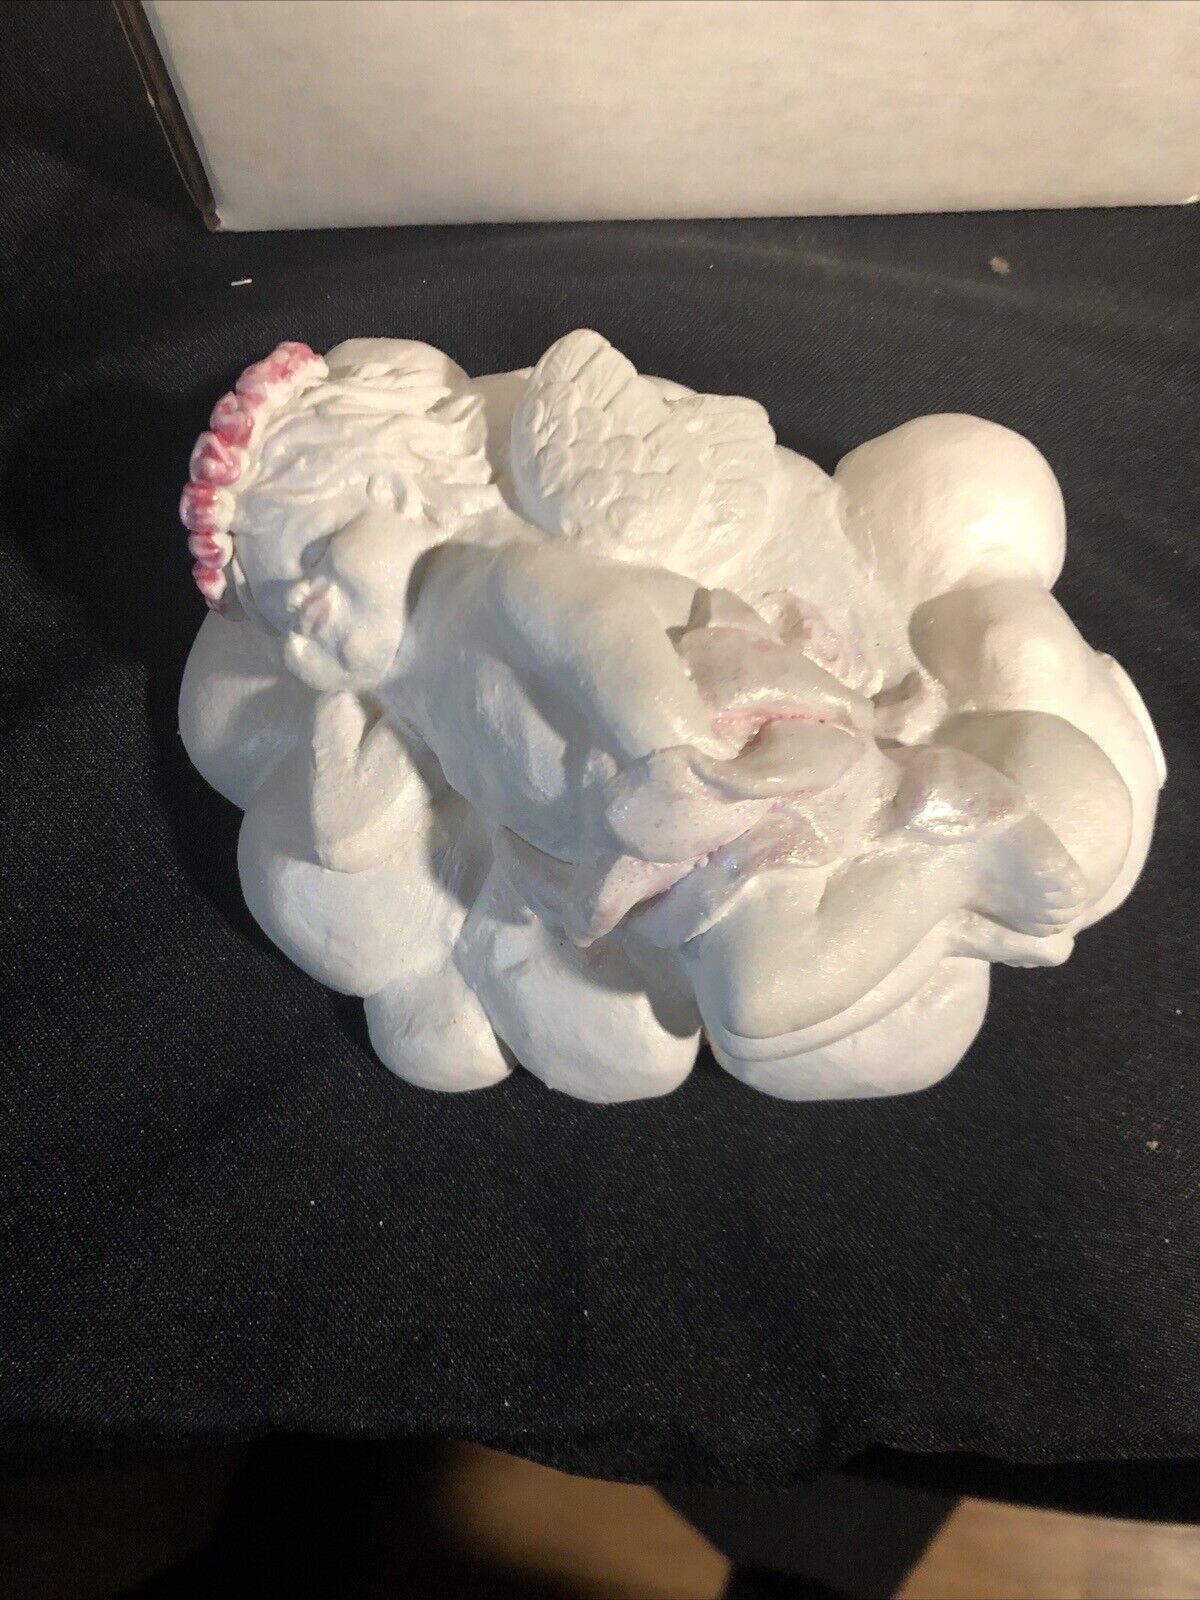 Hope Angels Enchanted Cottage Designs Cherub on a Cloud Limited Edition Figurine